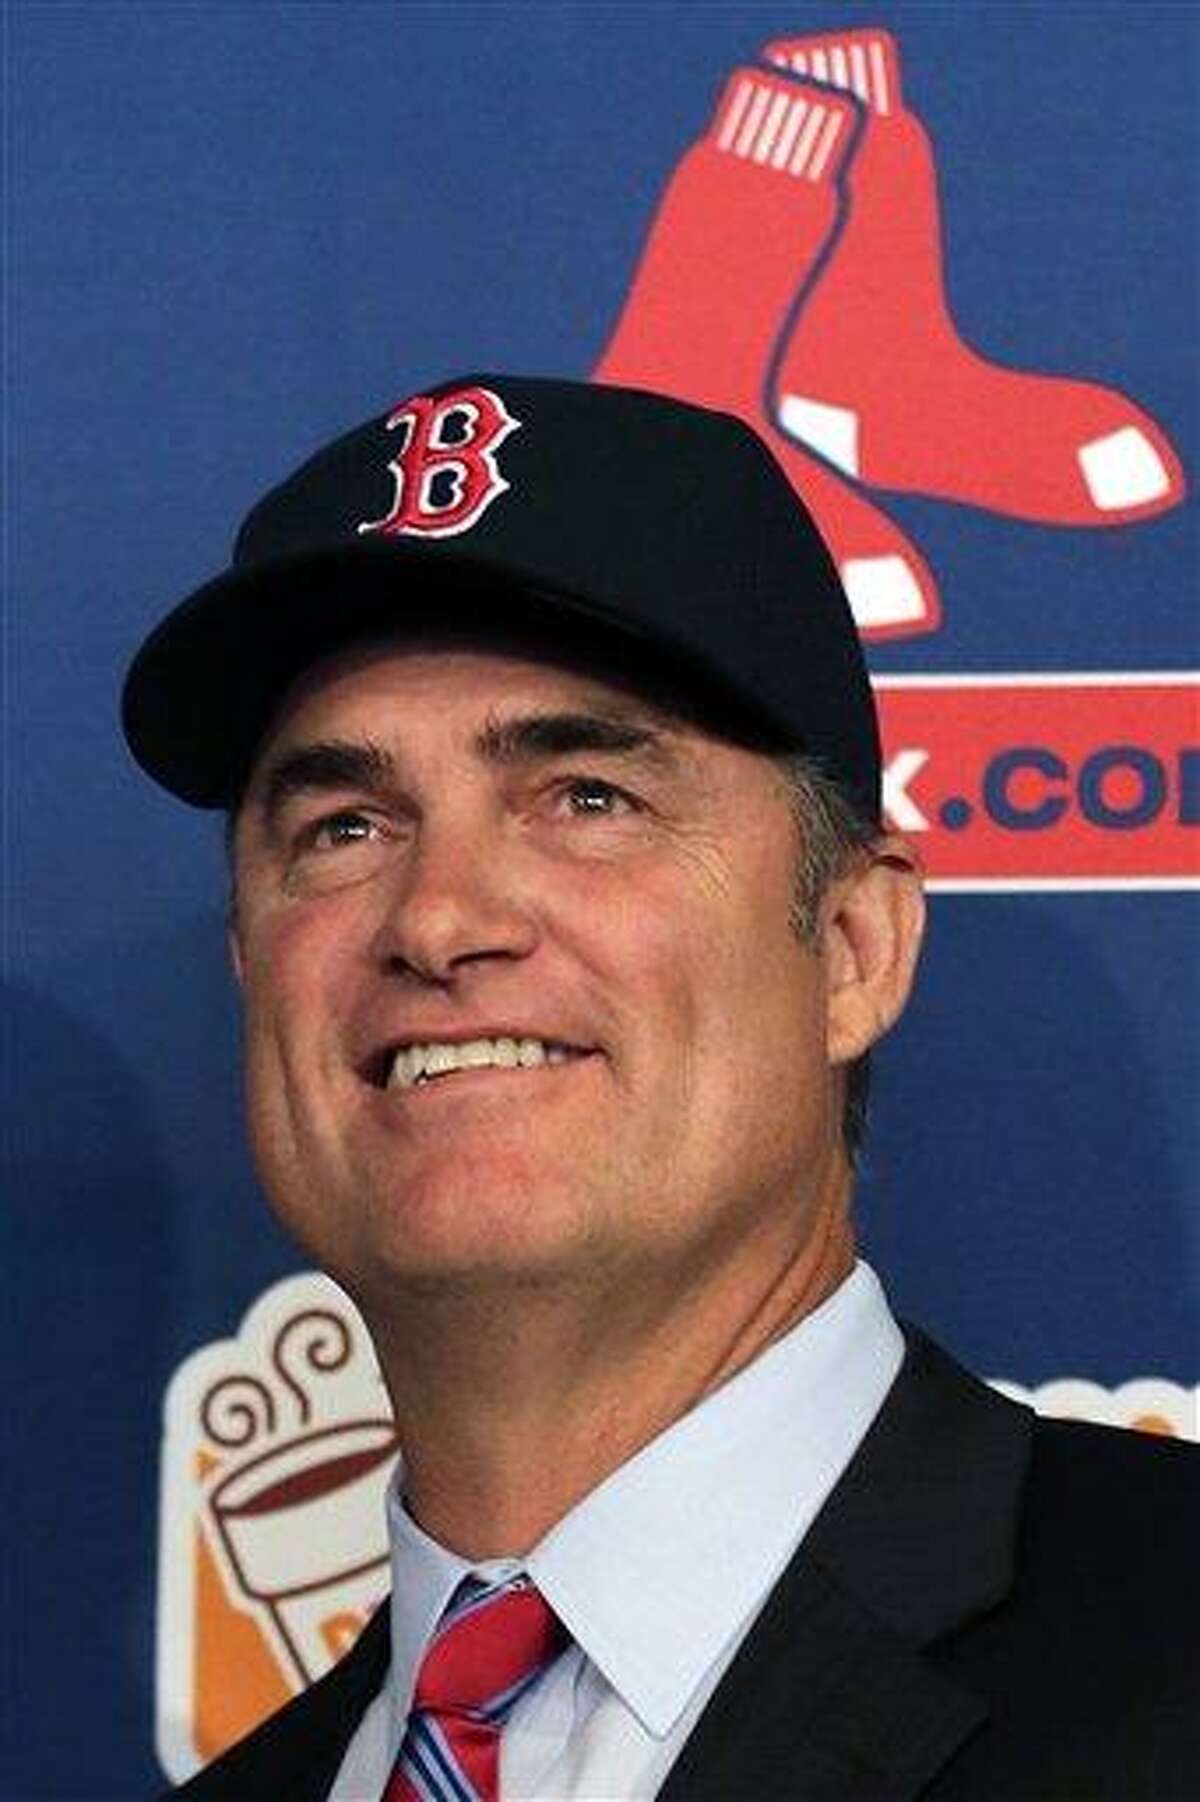 RED SOX: John Farrell looks forward to the future with the Boston Red Sox